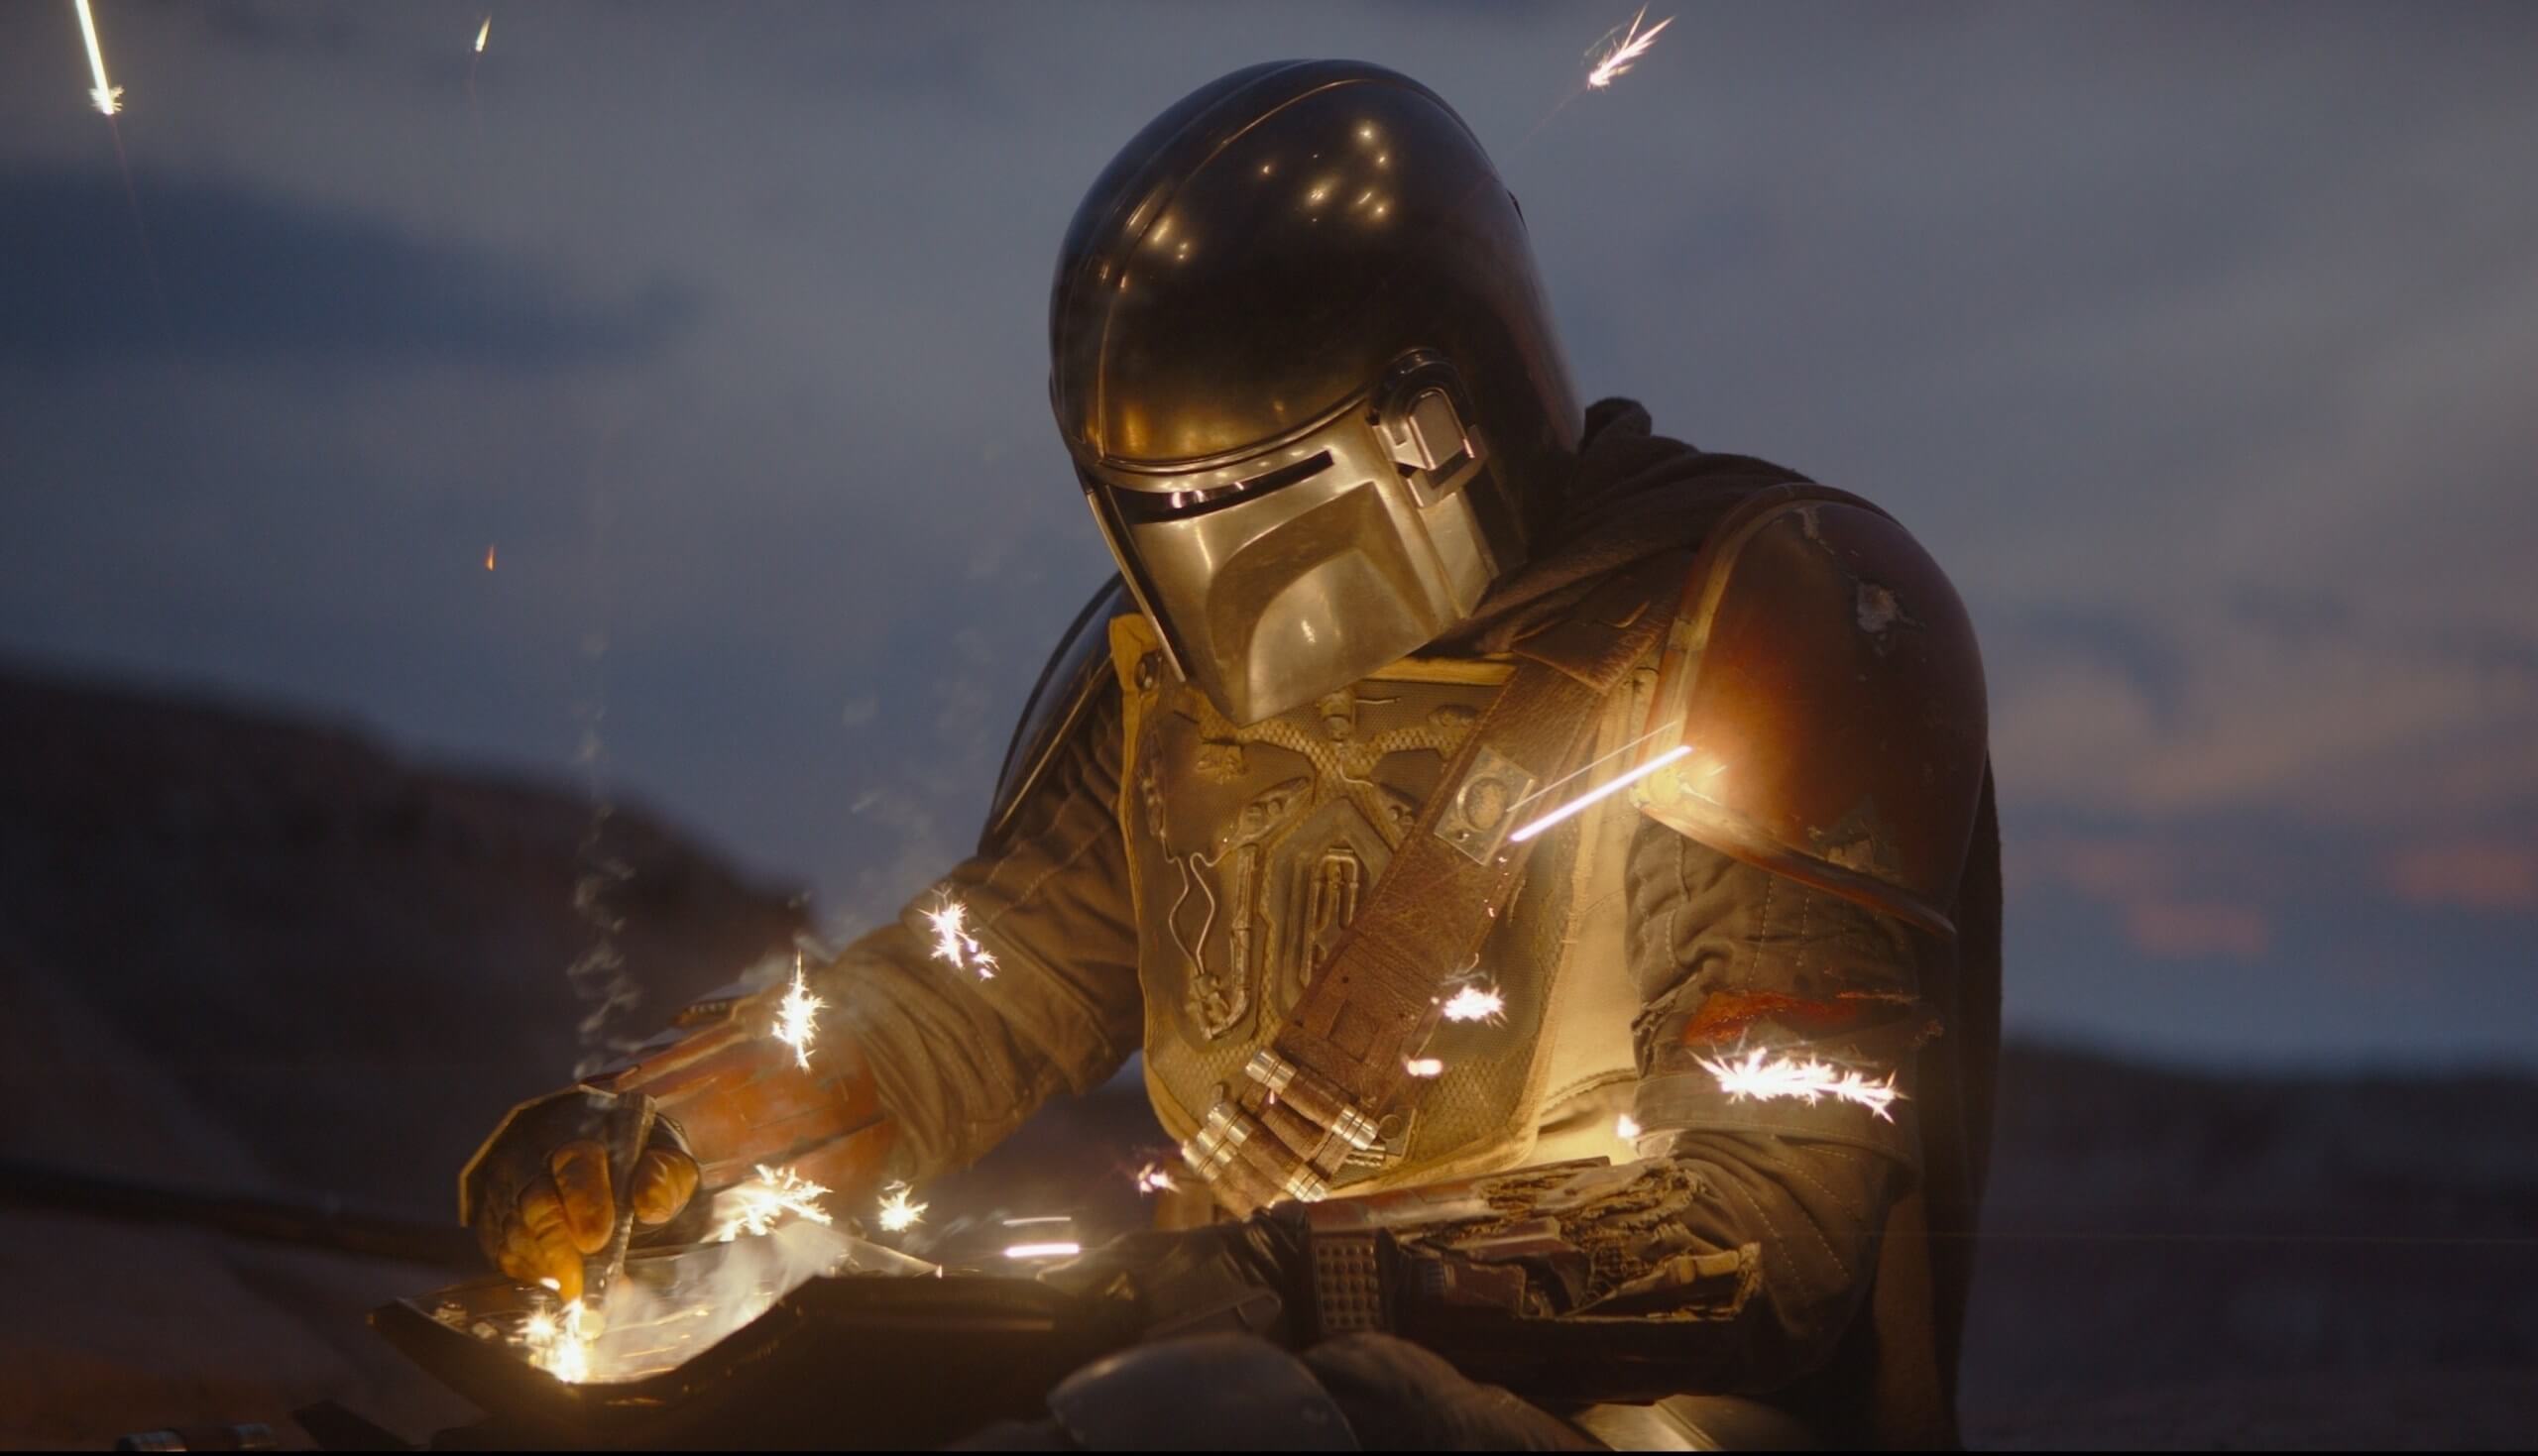 Disney uses Epic's Unreal Engine to render real-time sets in The Mandalorian